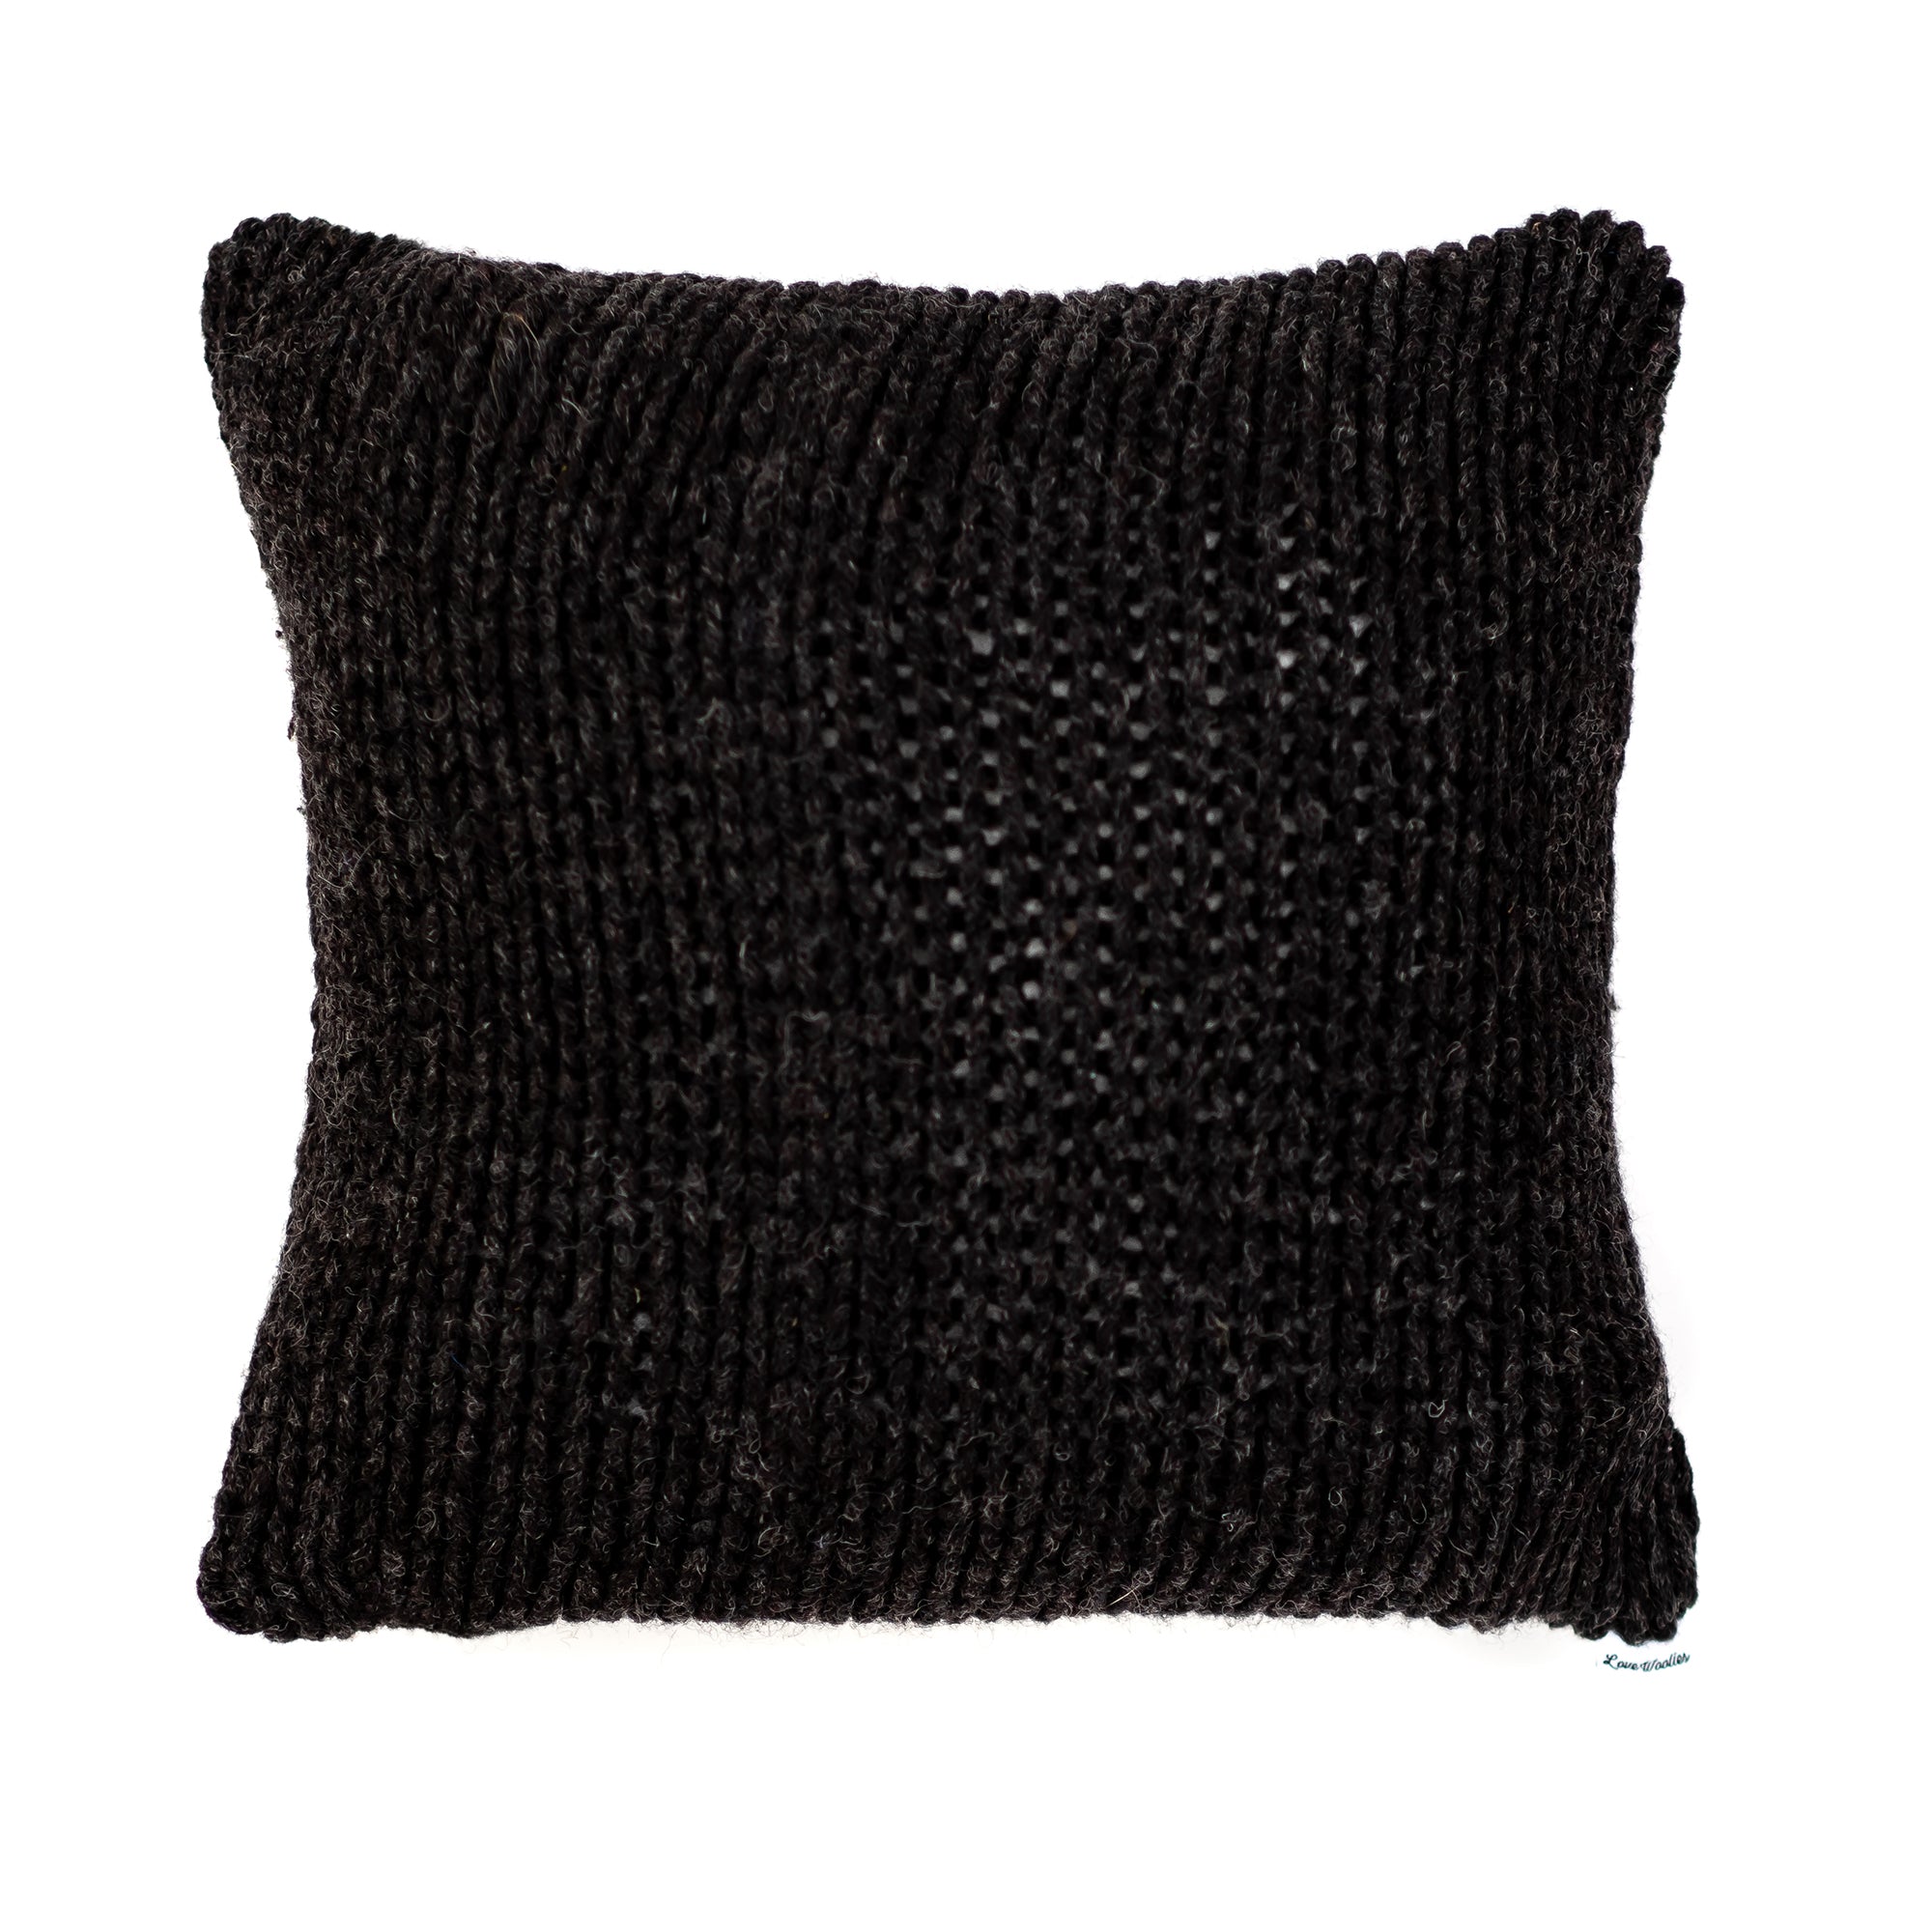 14x14 Charcoal Black Cable Knit Pillow Cover